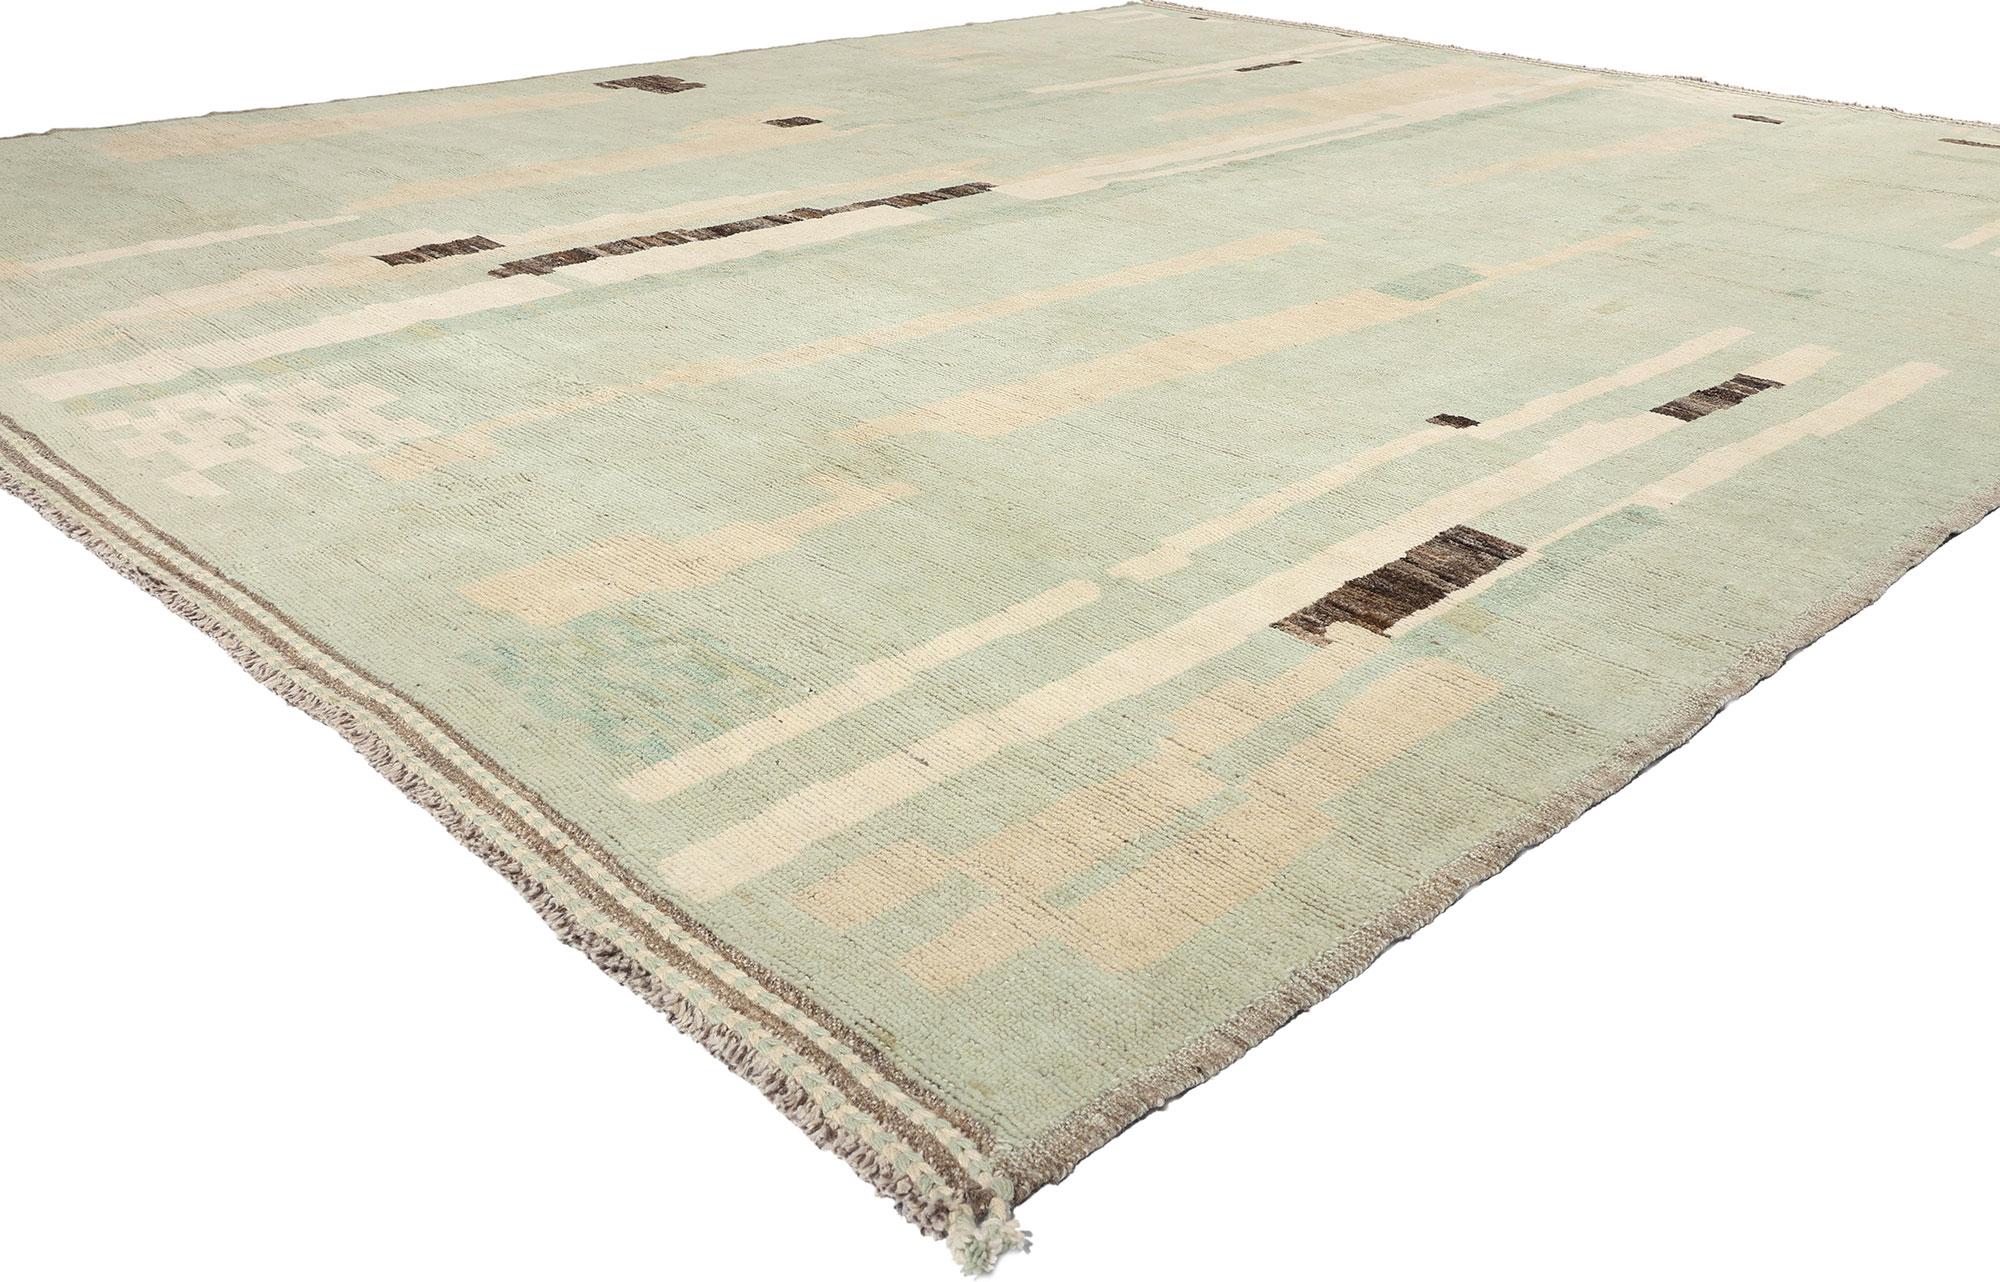 81052 Organic Modern Brutalist Moroccan Rug, 12'05 x 14'10. This hand-knotted wool Organic Modern Moroccan rug is a stunning fusion of Brutalist-inspired simplicity and Biophilic Design's harmonious connection with nature. Crafted with meticulous